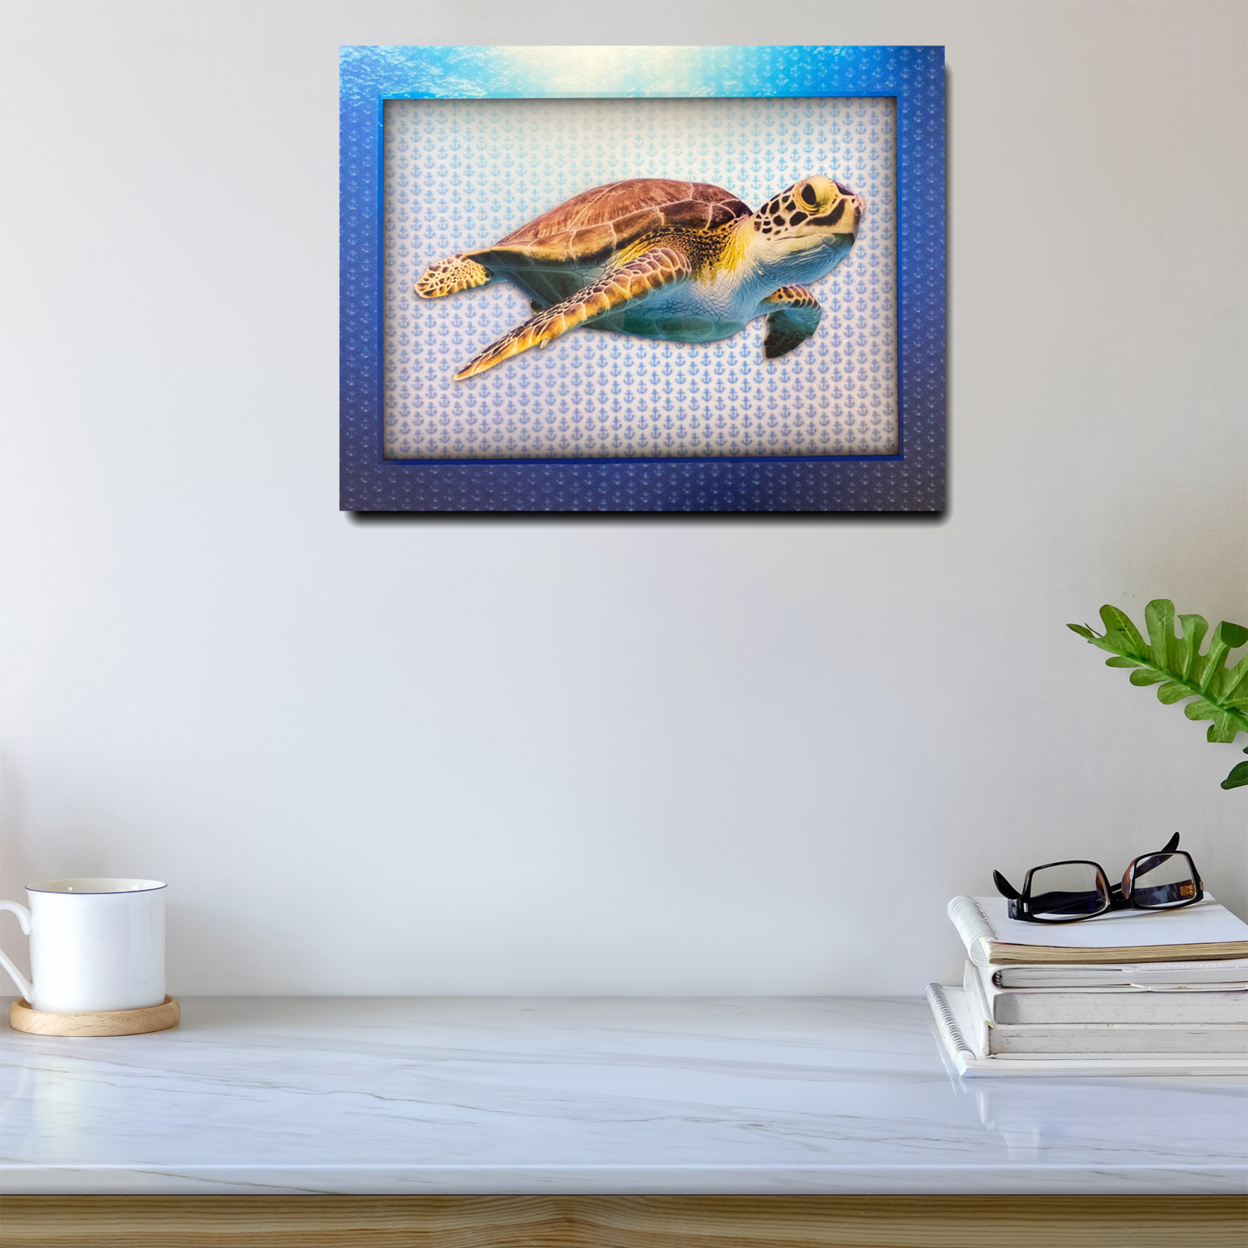 5D Multi-Dimensional Wall Art - Custom Made Turtle Wall Art Print On Strong Polycarbonate Panel W/ Vibrant Colors By Matashi (16x20 In)